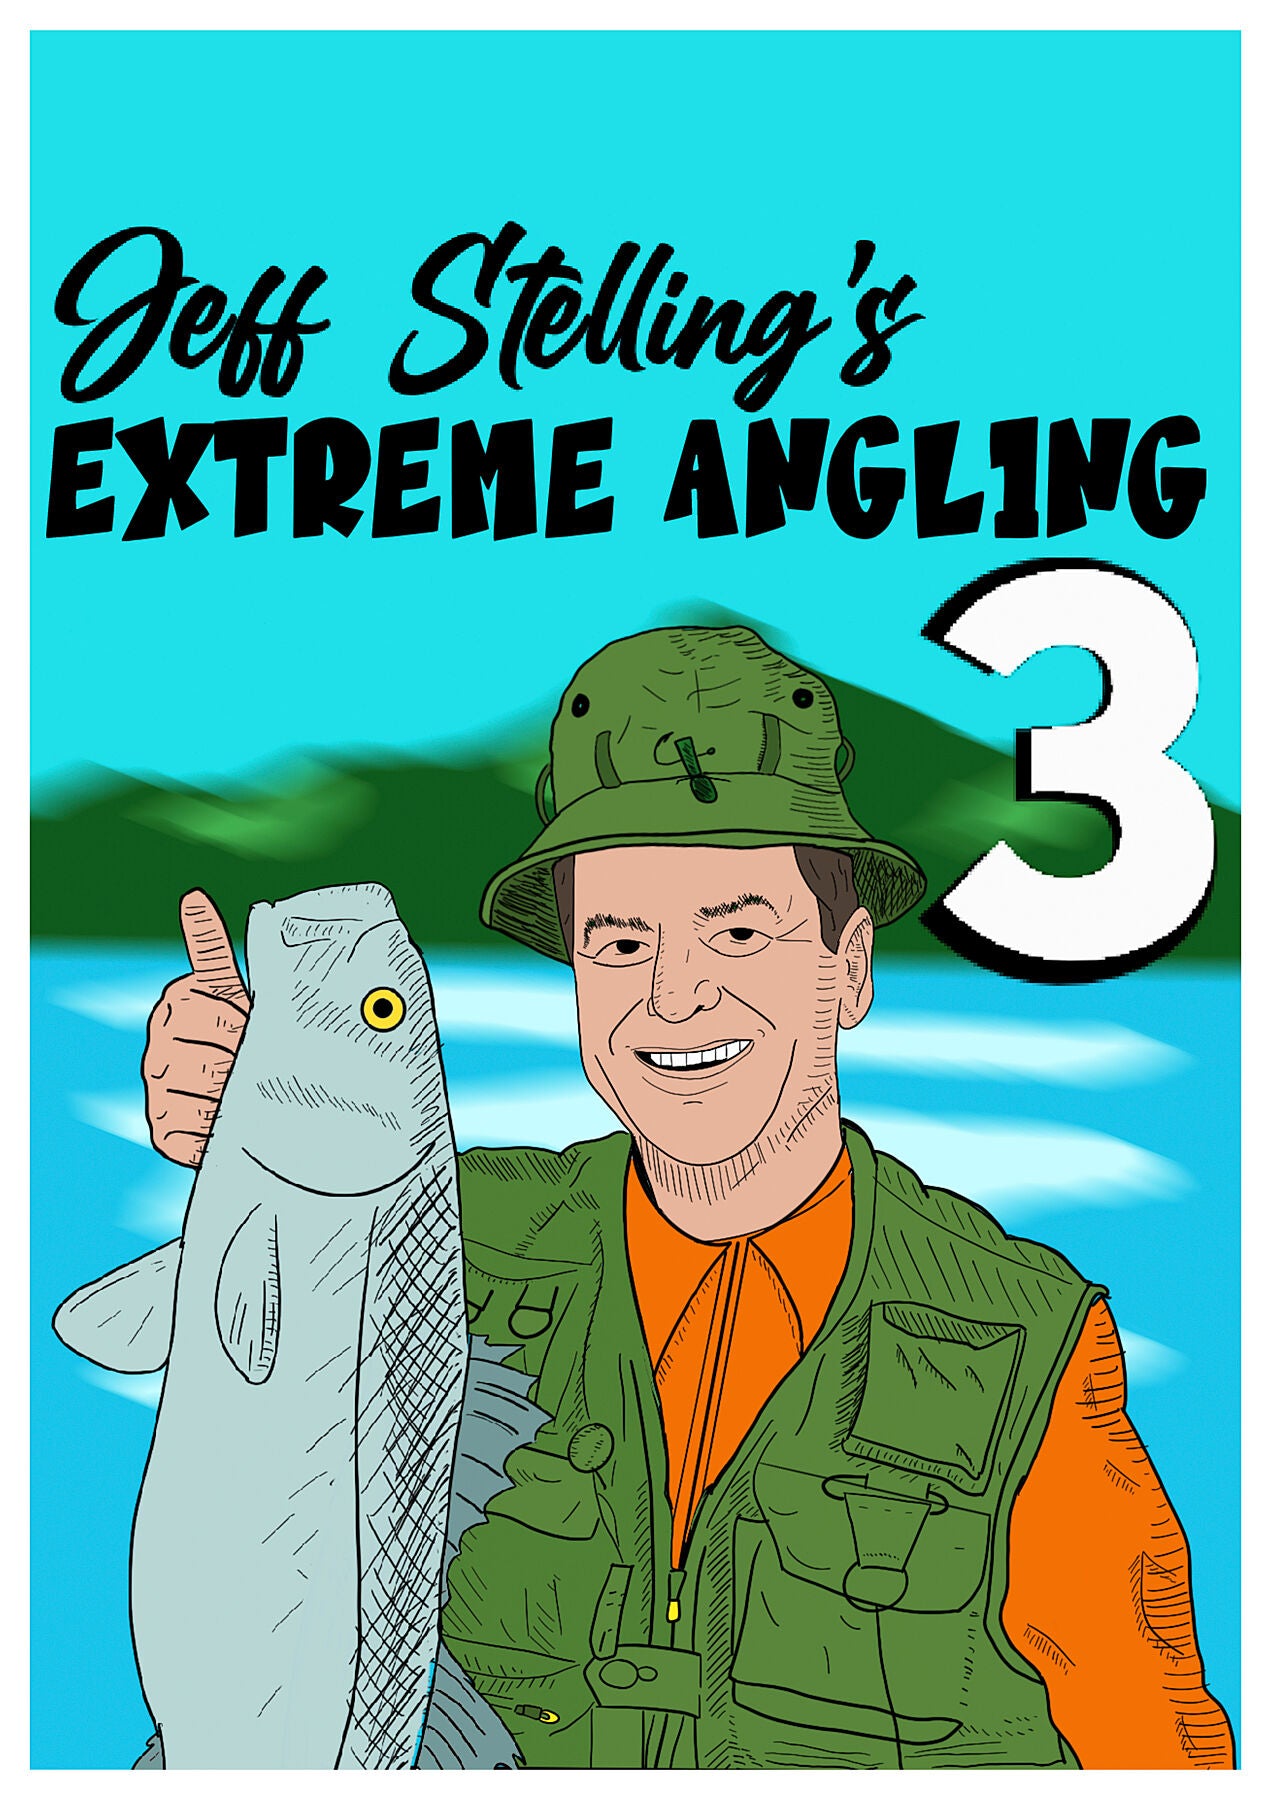 Jeff Stelling's Extreme Angling 3 book cover showing Jeff Stelling holding up a fish that he's caught by Yorkshire Nation